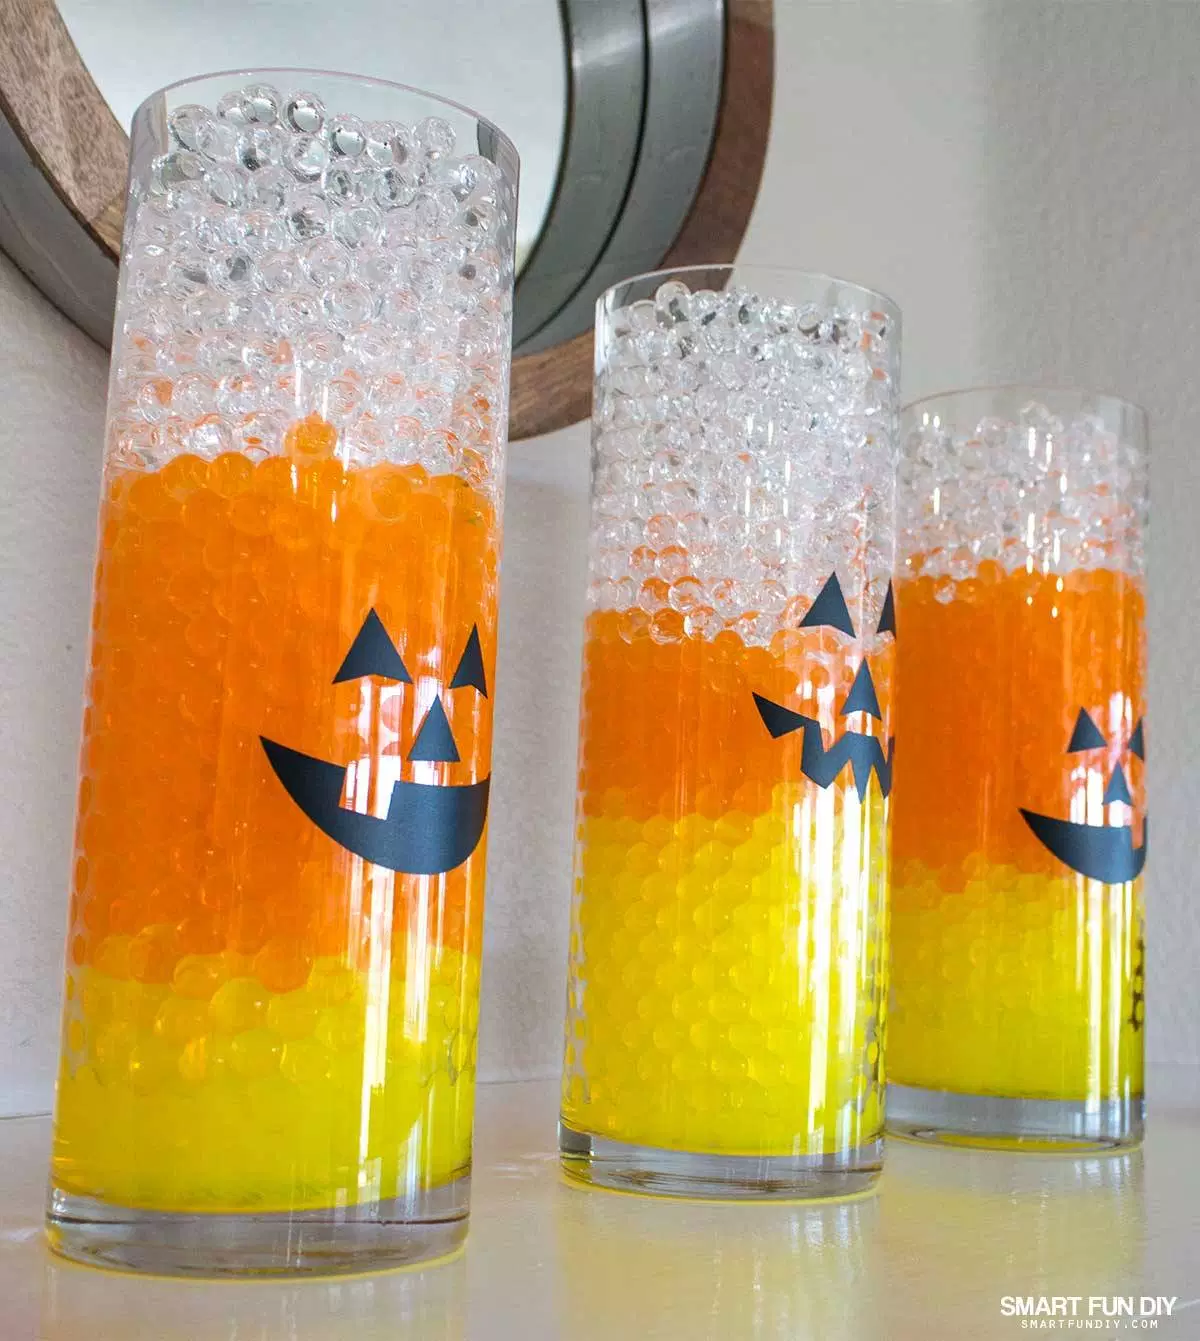 Candy Corn Halloween Vases: These 30 DIY Halloween Decorations That Are Wickedly Creative will save you money and allow your creativity to flourish